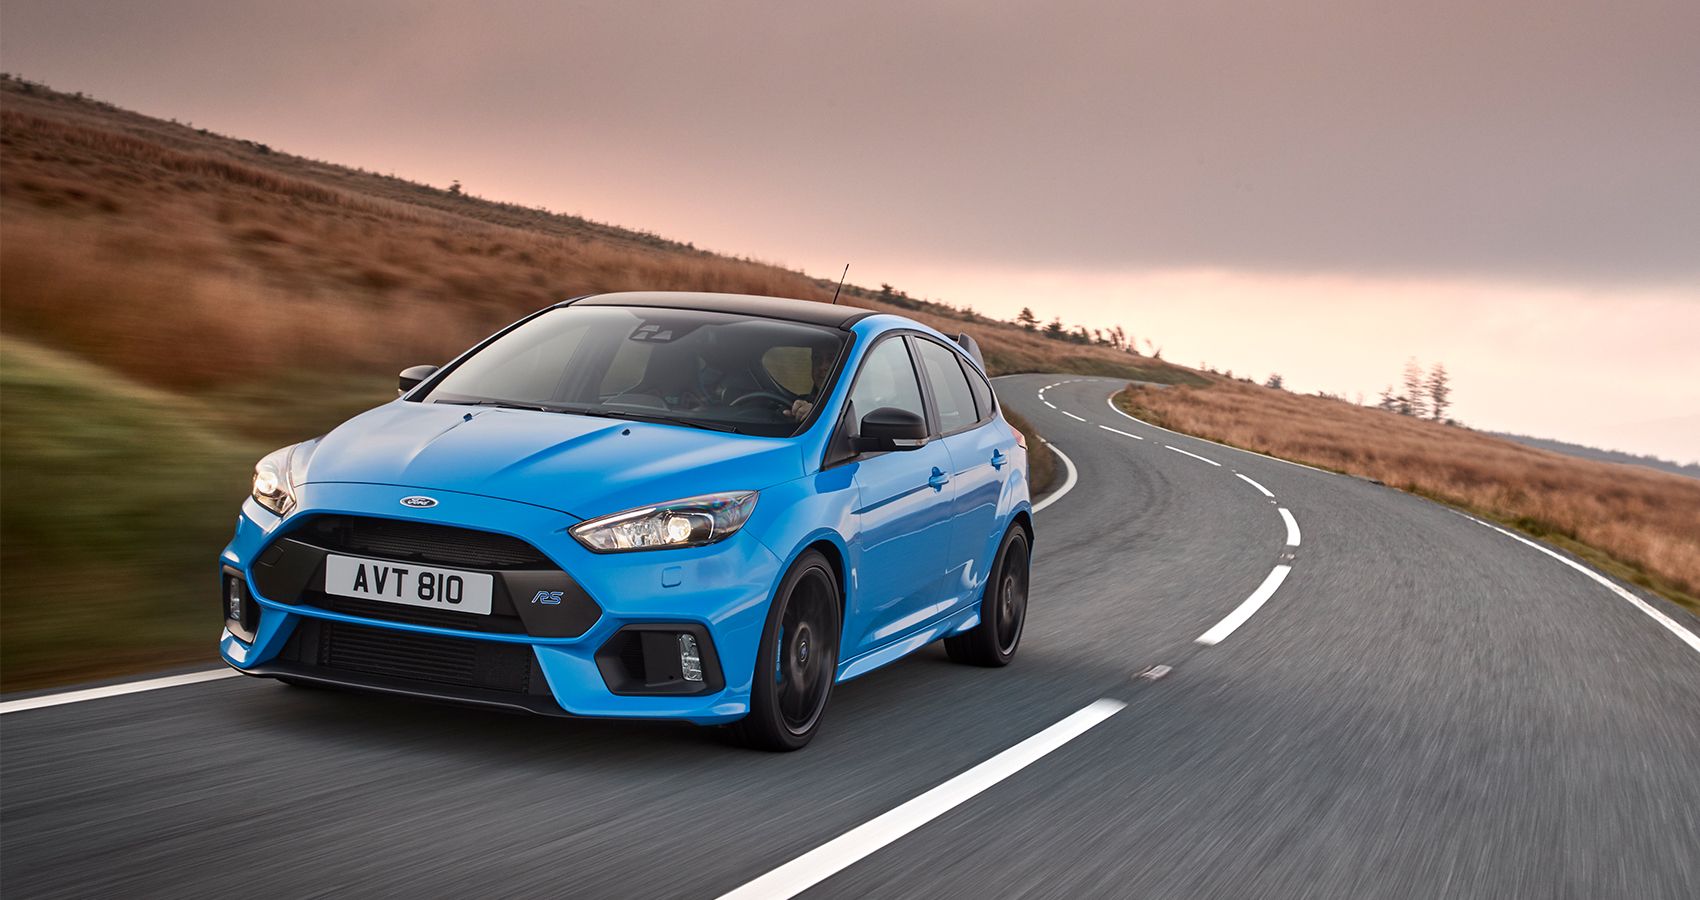 The Focus RS in Nitrous Blue on the move